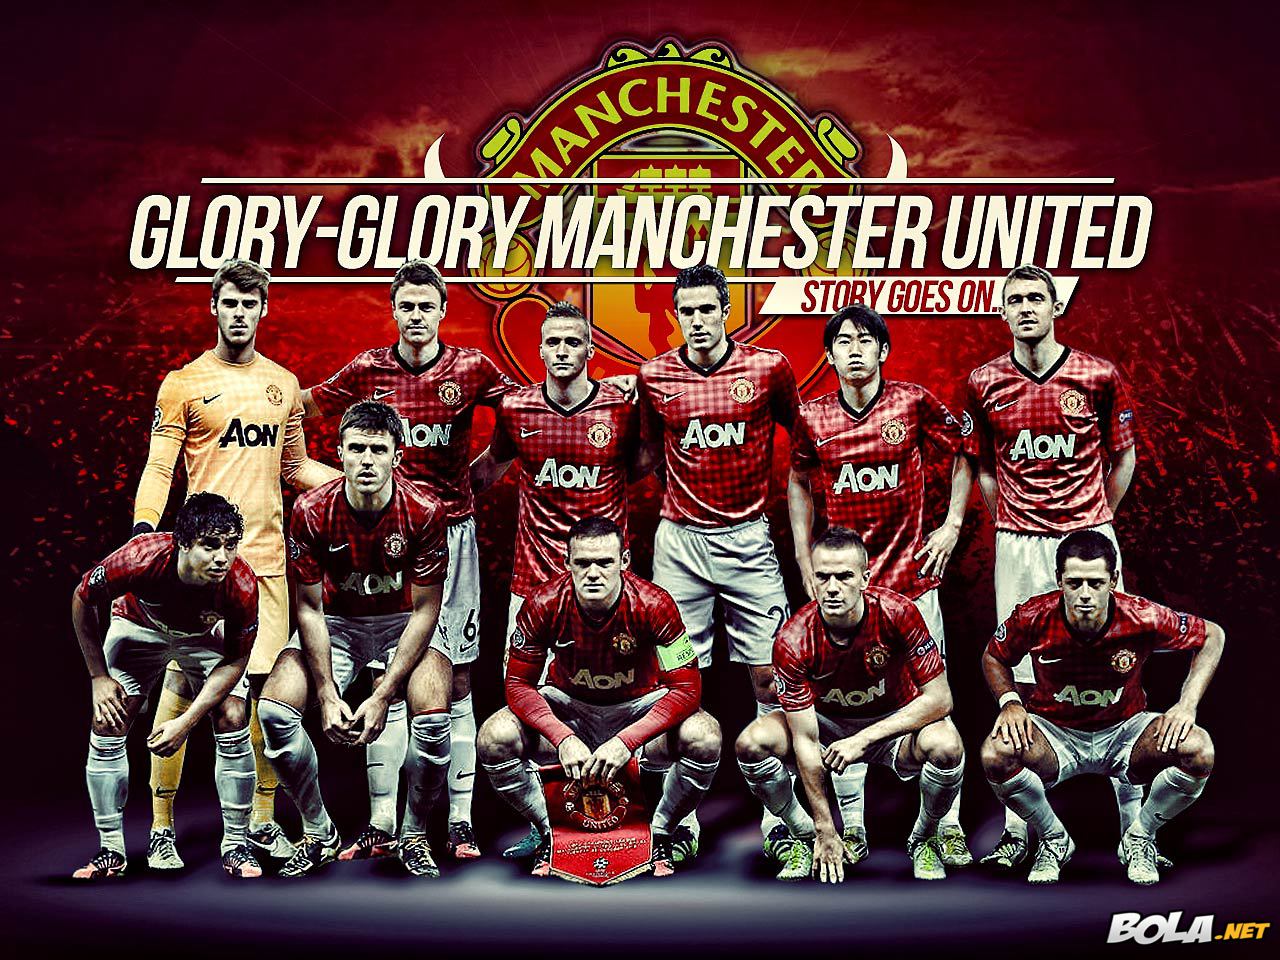 Download Wallpaper Manchester United Bolanet